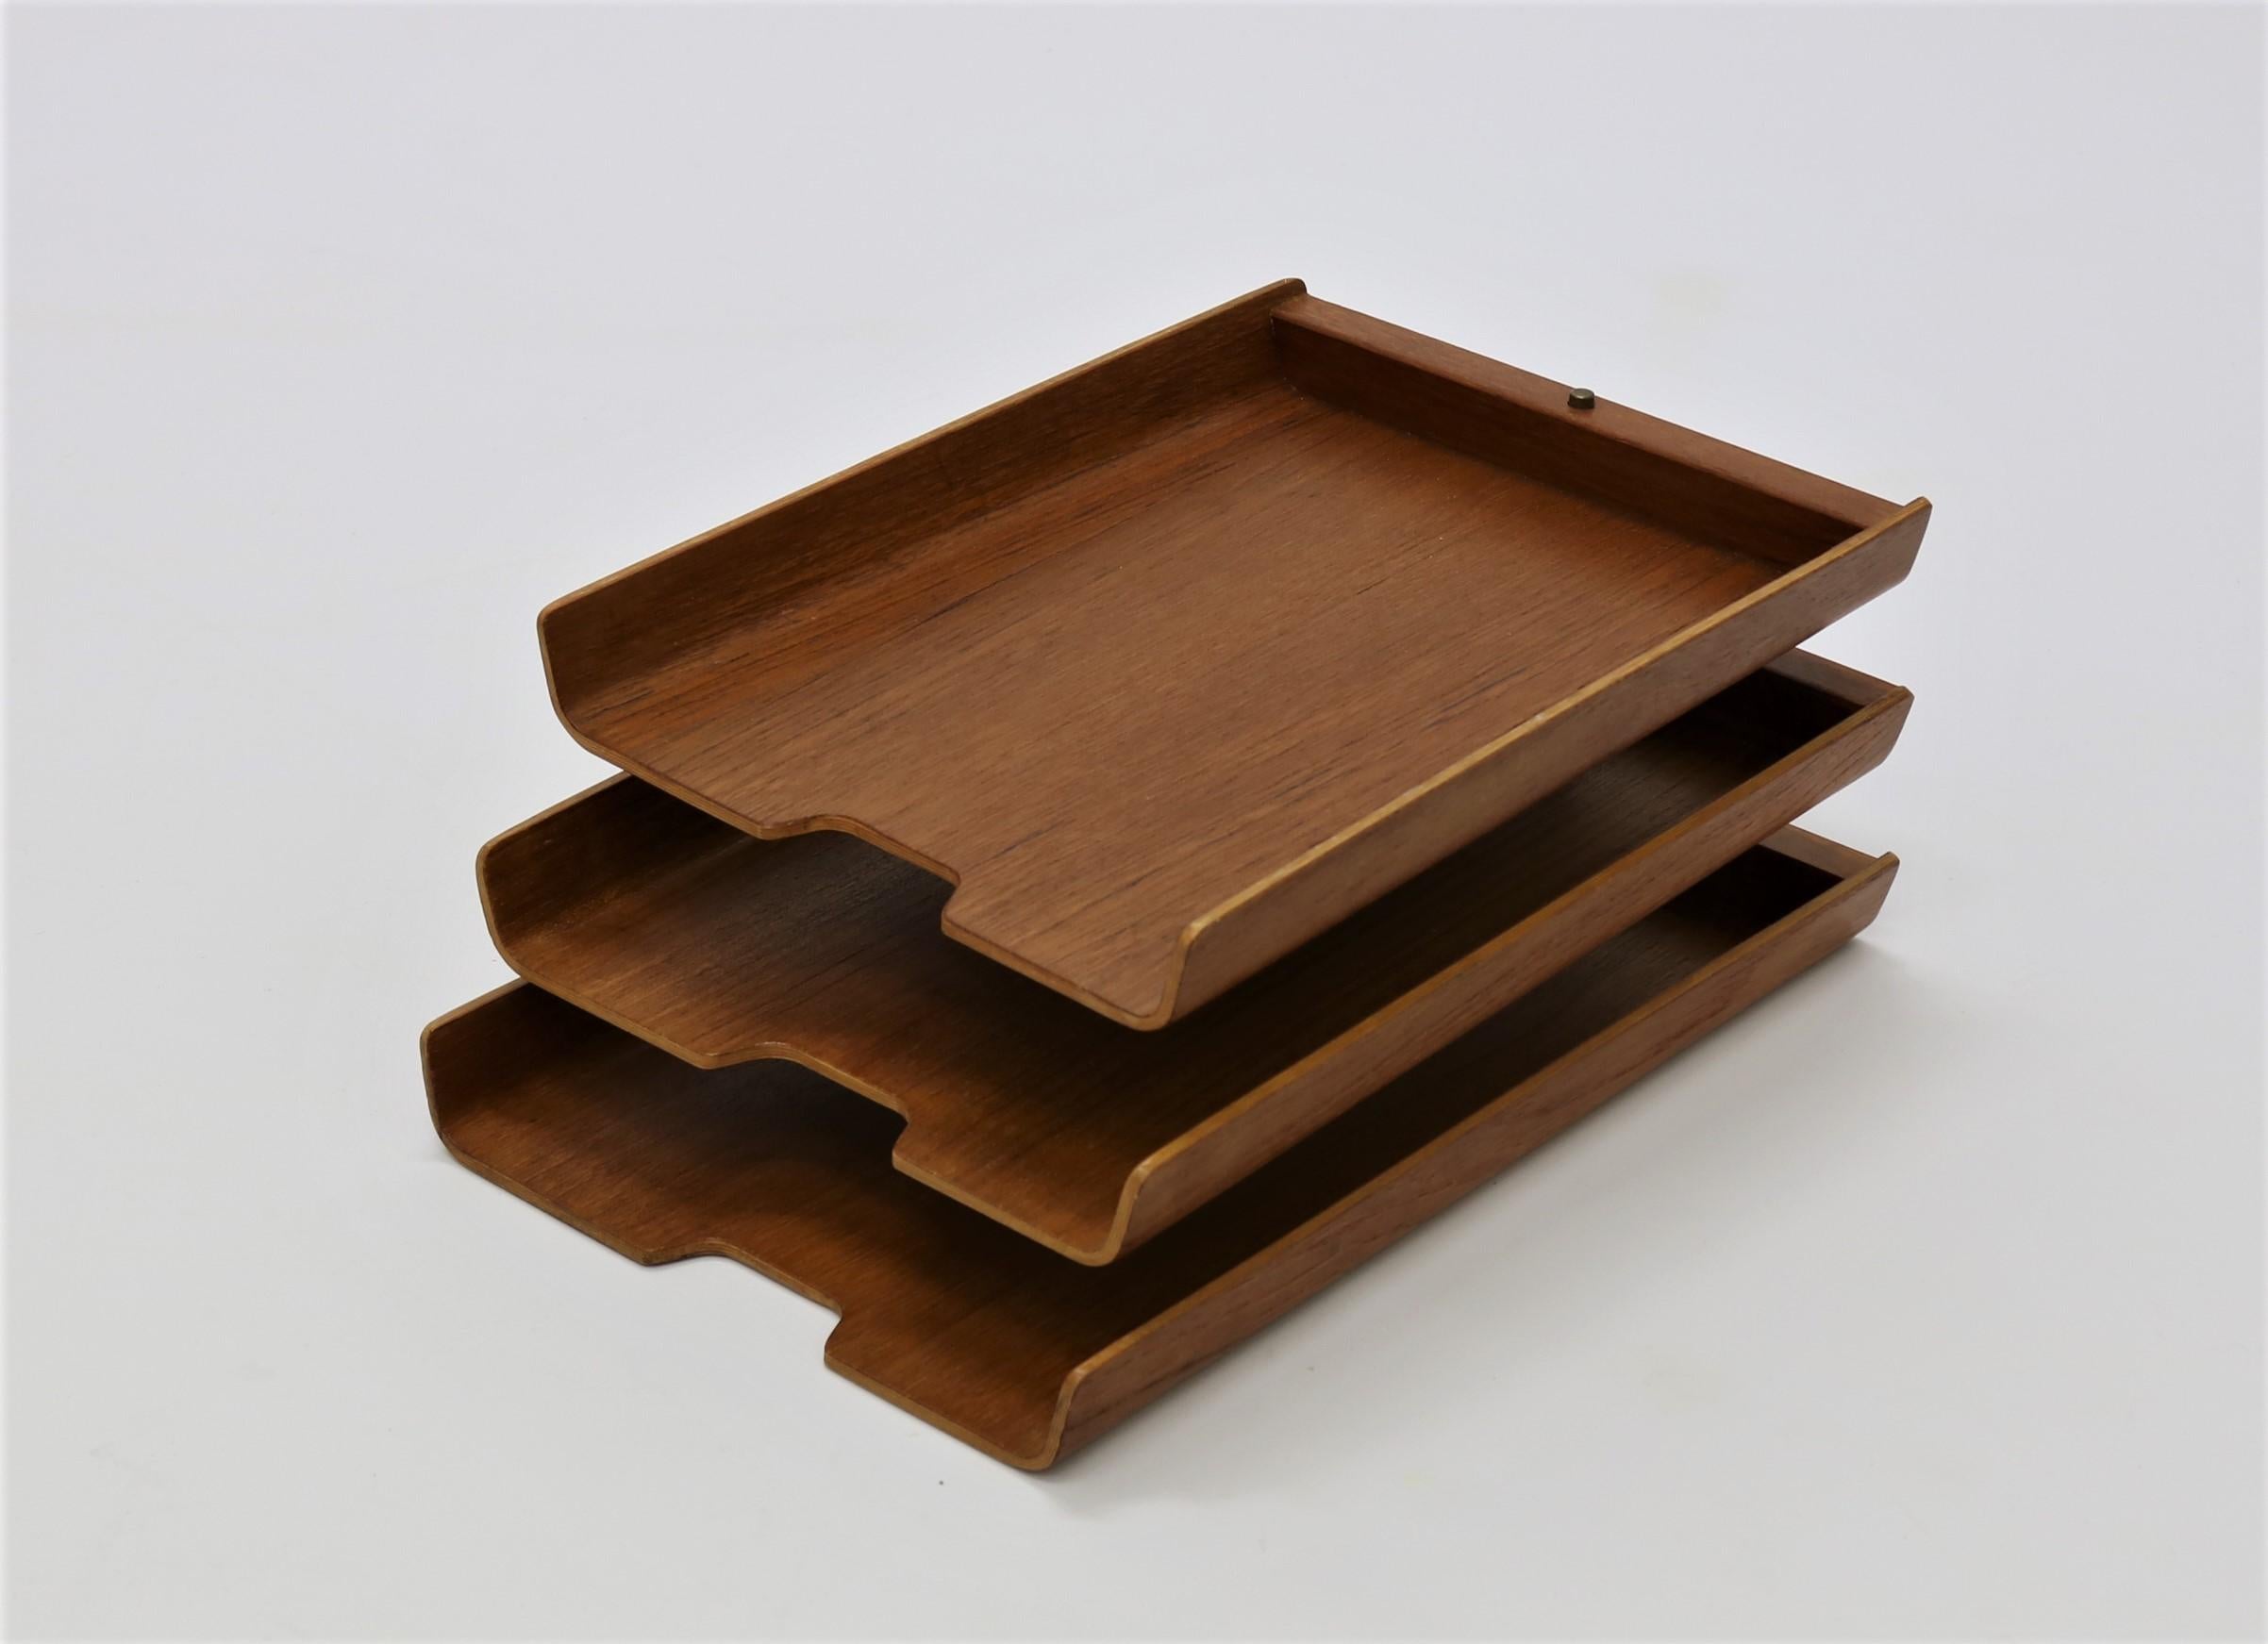 Rare triple letter tray by Martin Aberg for Servex of Sweden, circa 1960. The trays are made of molded teak plywood and are mounted on brass fittings. The trays can be adjusted in any number of configurations.